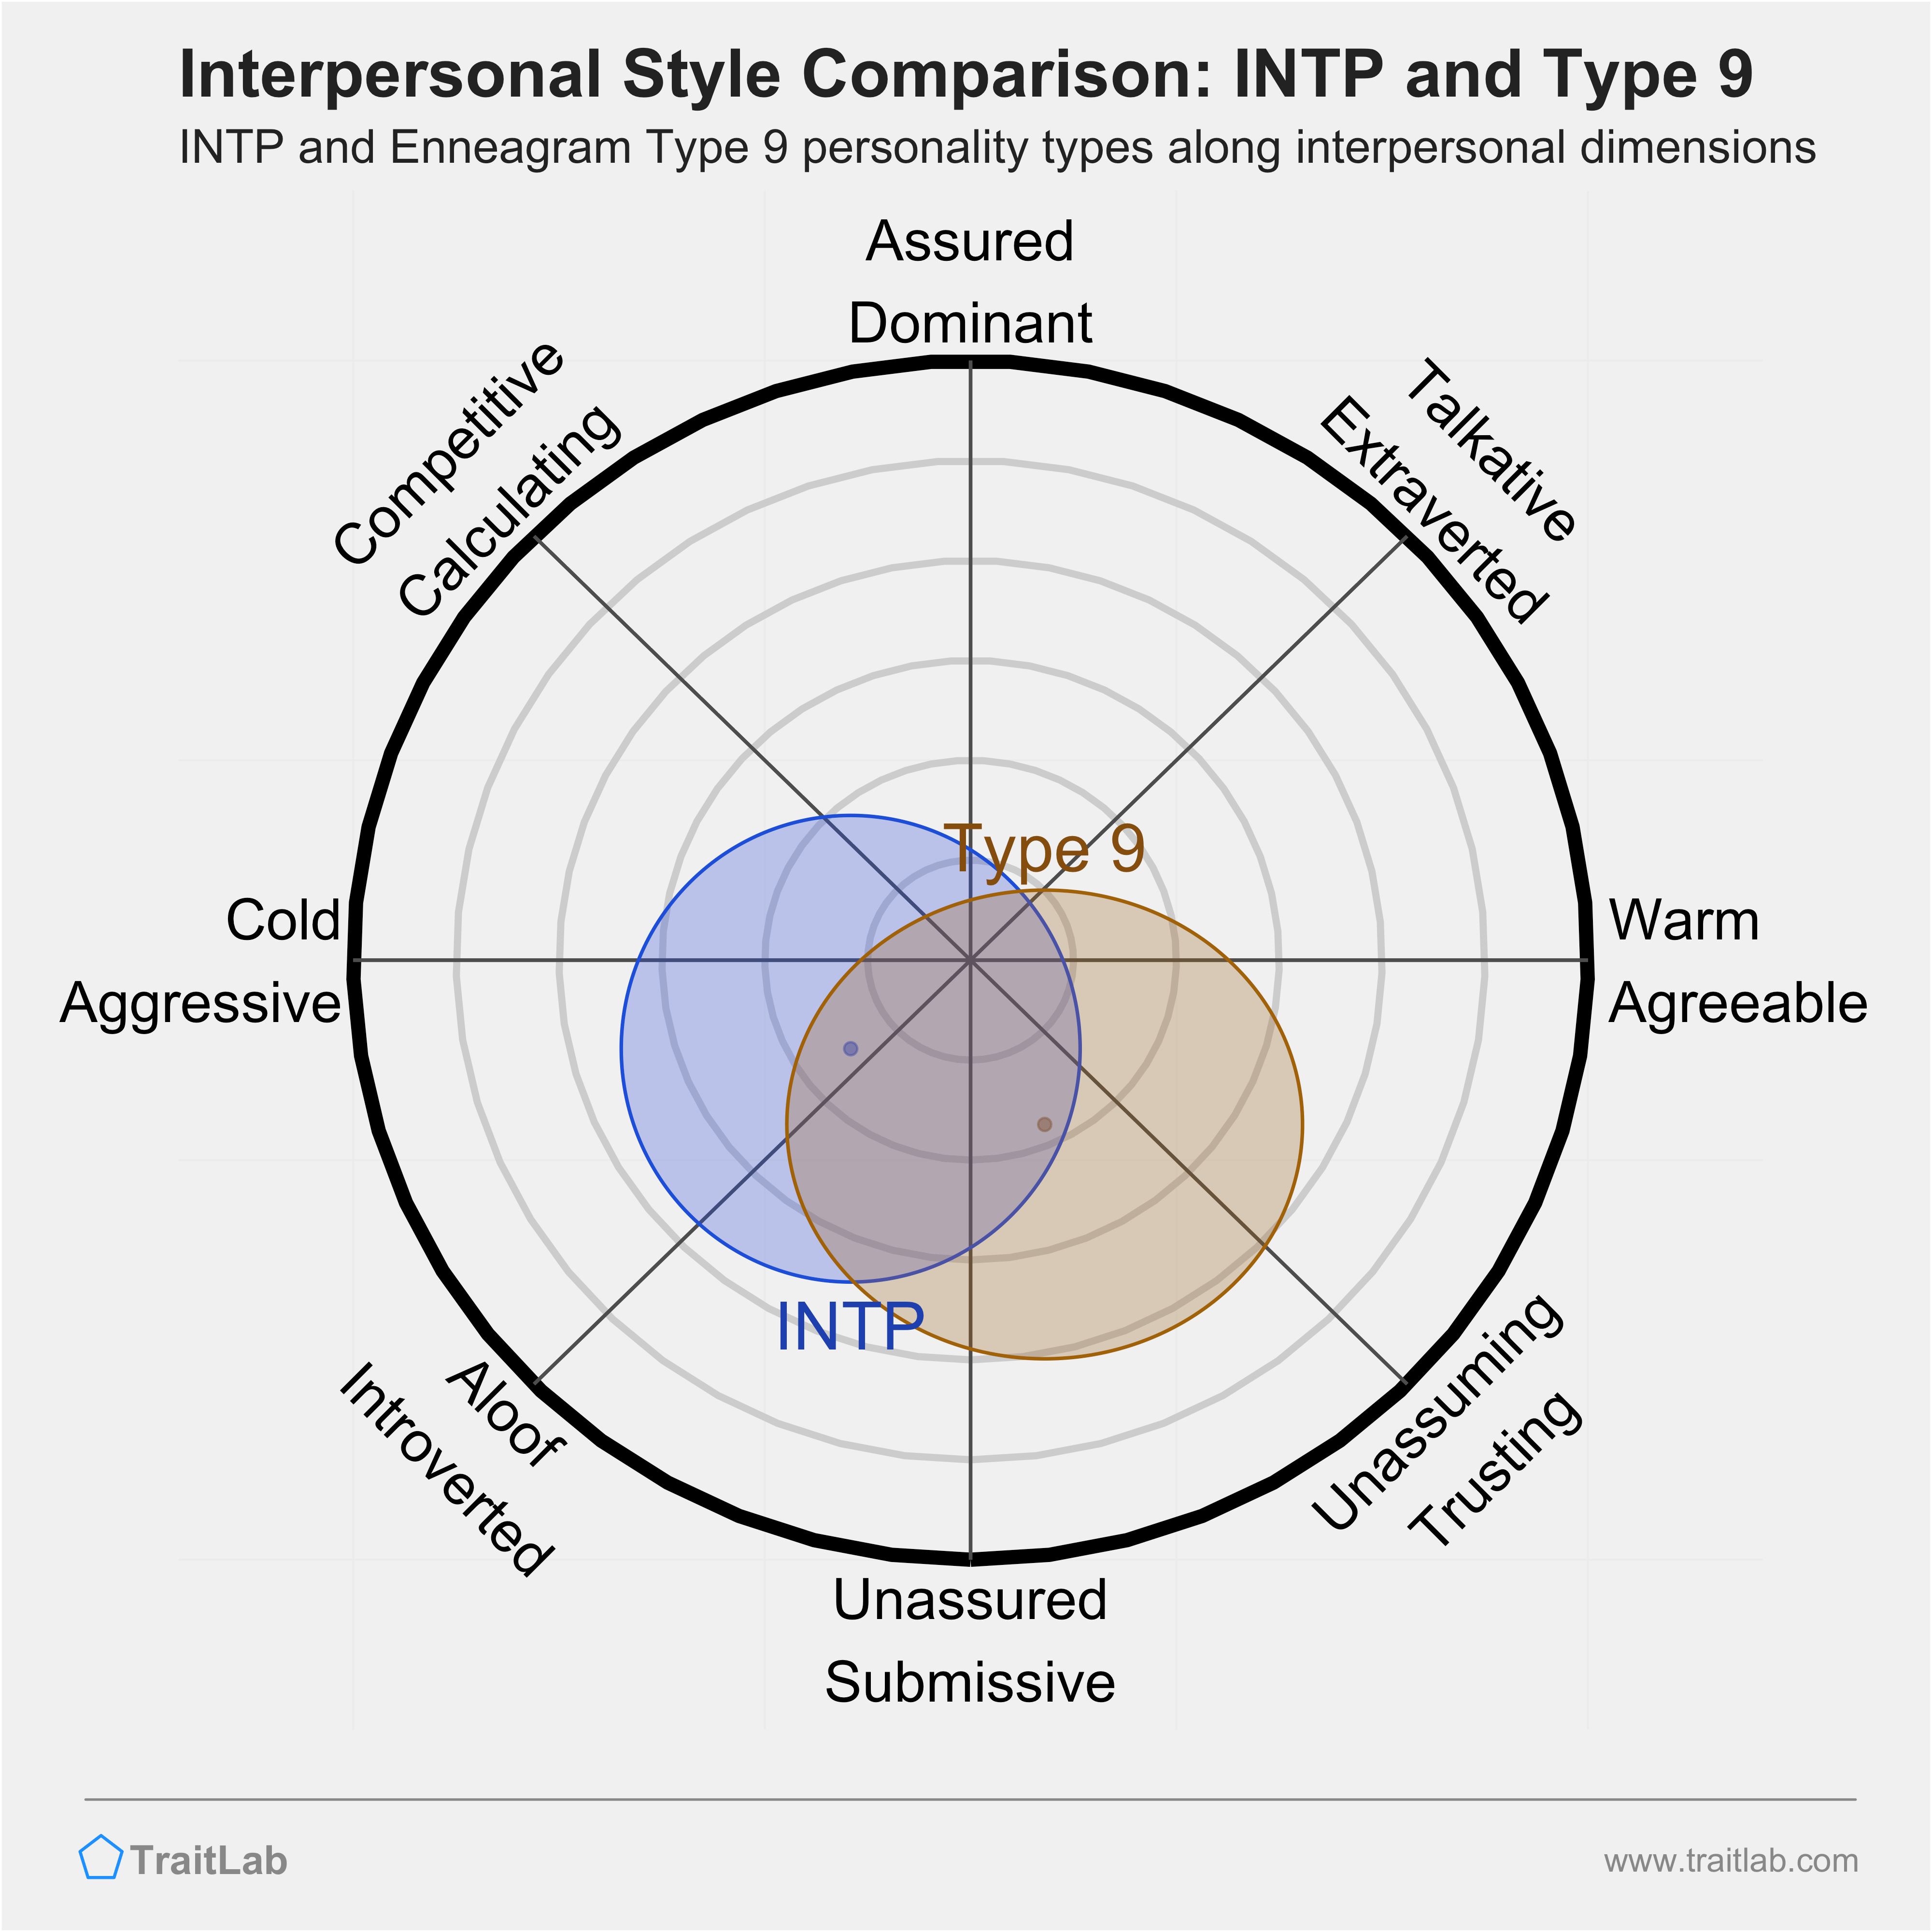 Enneagram INTP and Type 9 comparison across interpersonal dimensions